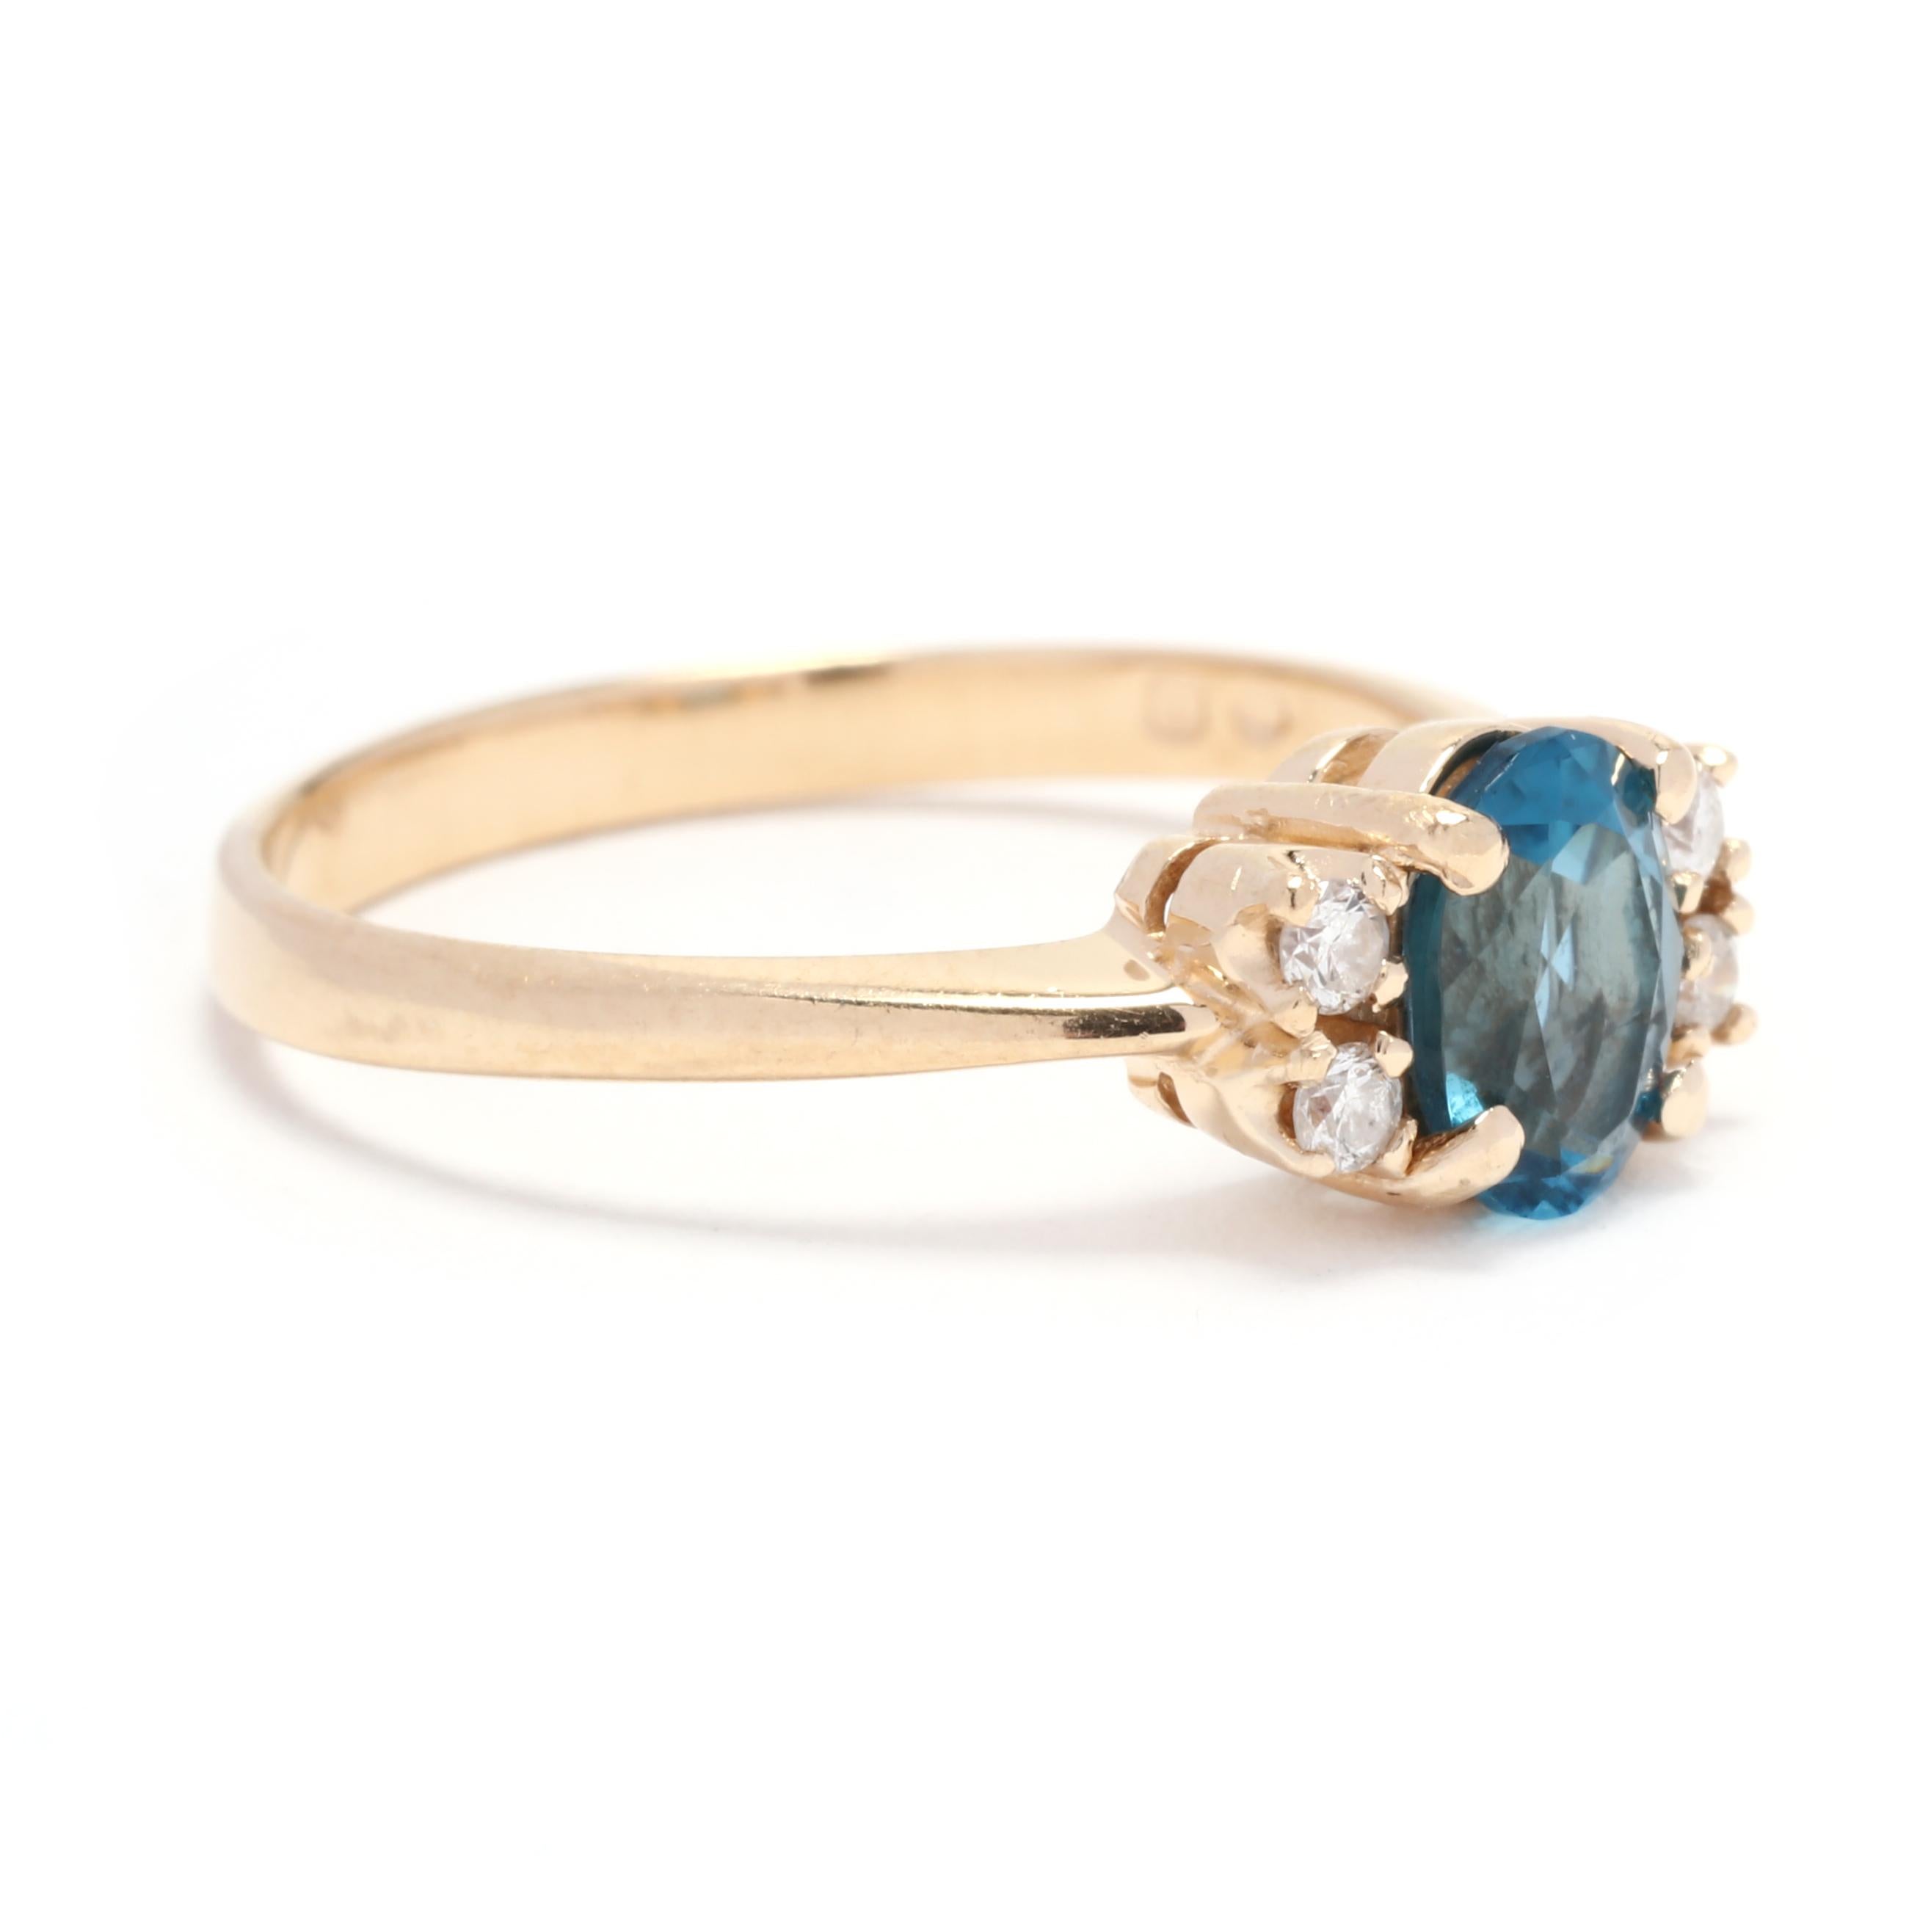 This stunning London Blue Topaz and Diamond ring is the perfect 